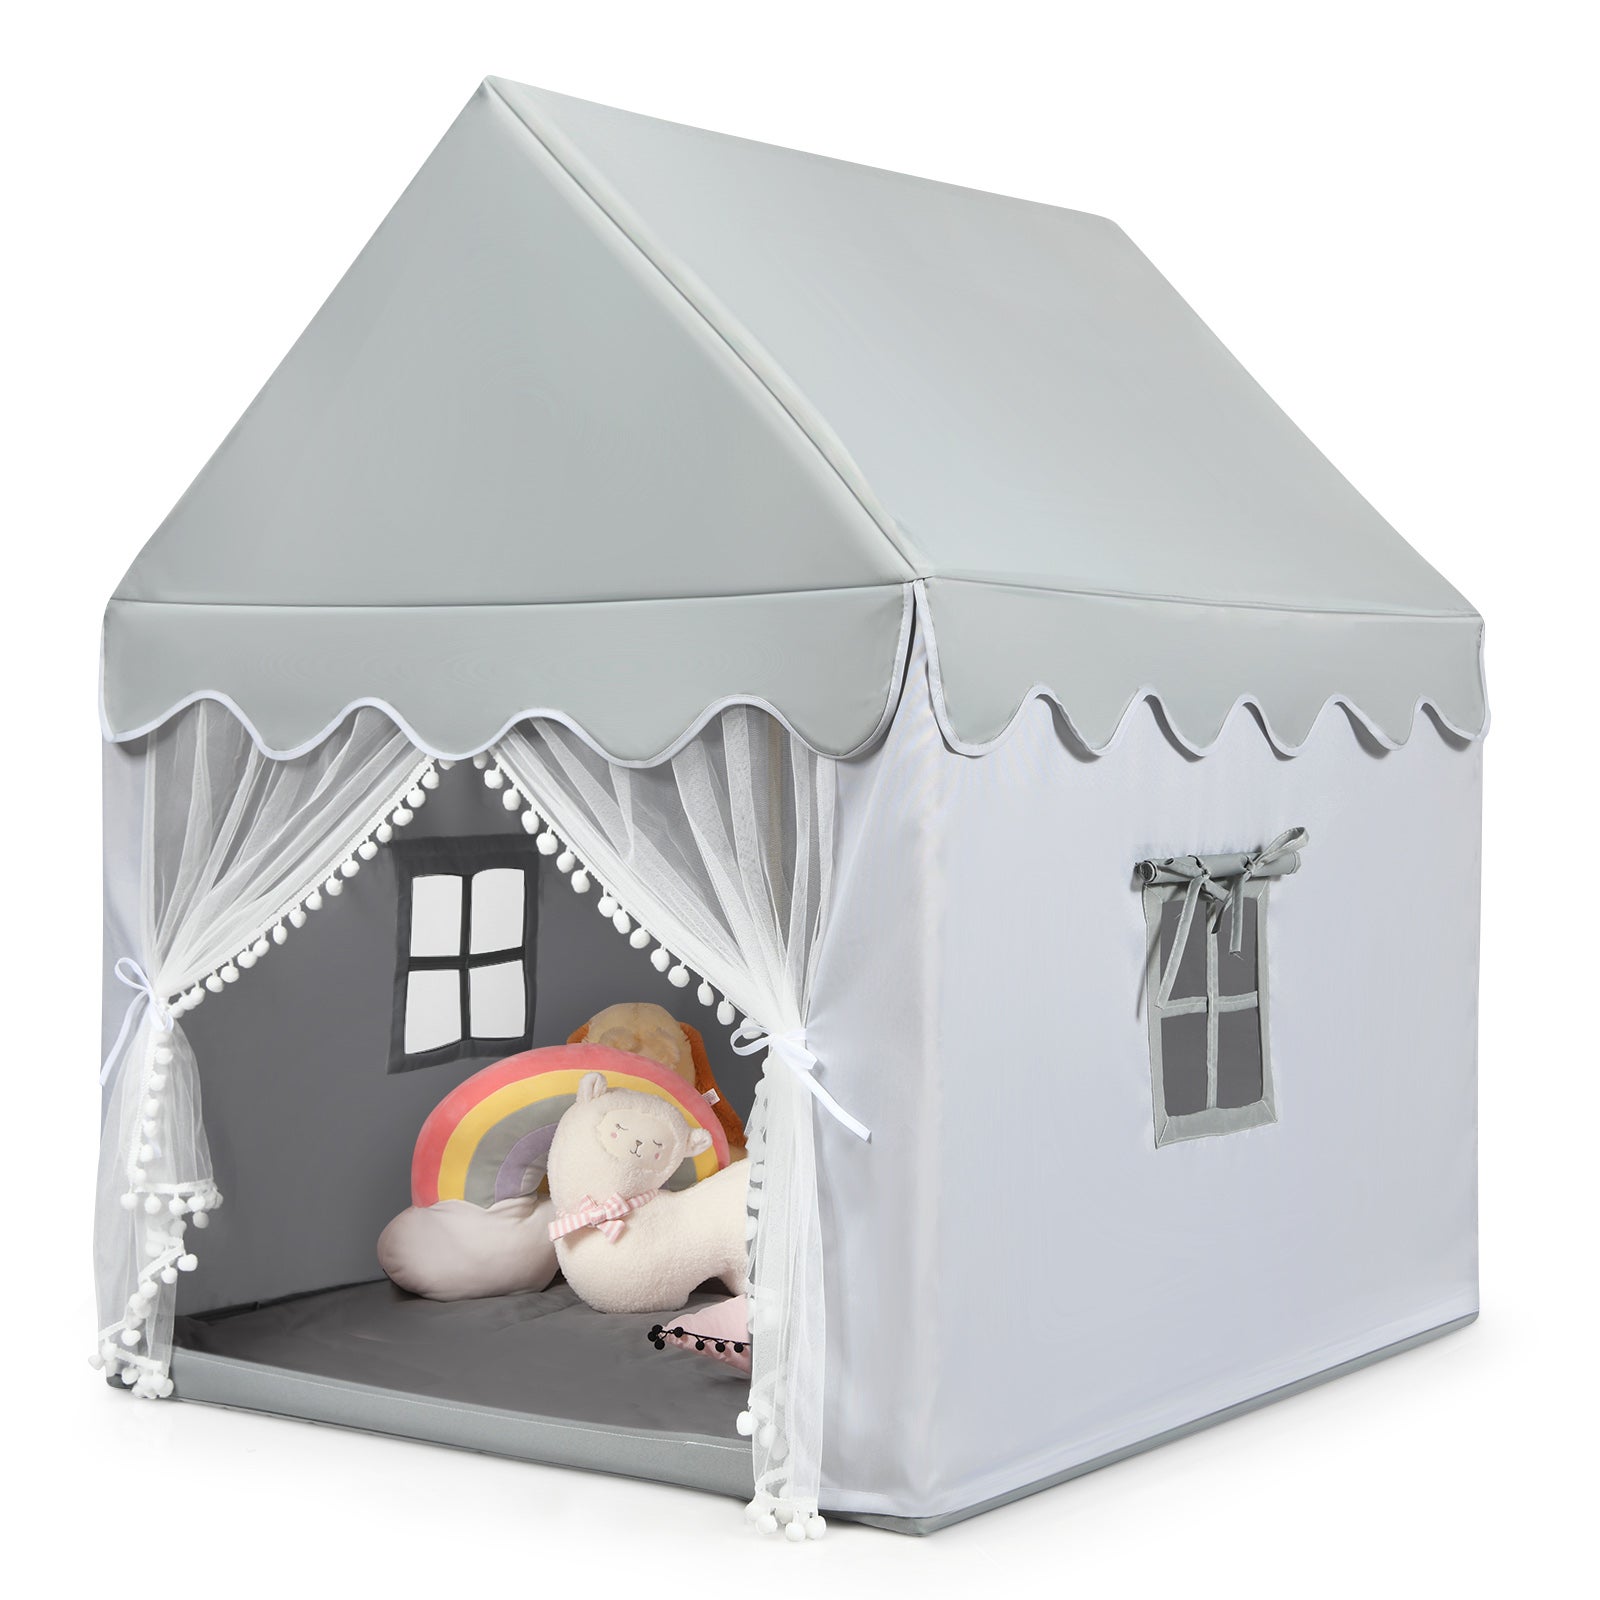 Costway Wood Kids Play house Fairy Play Tent Princess Castle Playhouse w/Cotton Mat, Indoor Boys & Girls, Xmas Birthday Gift